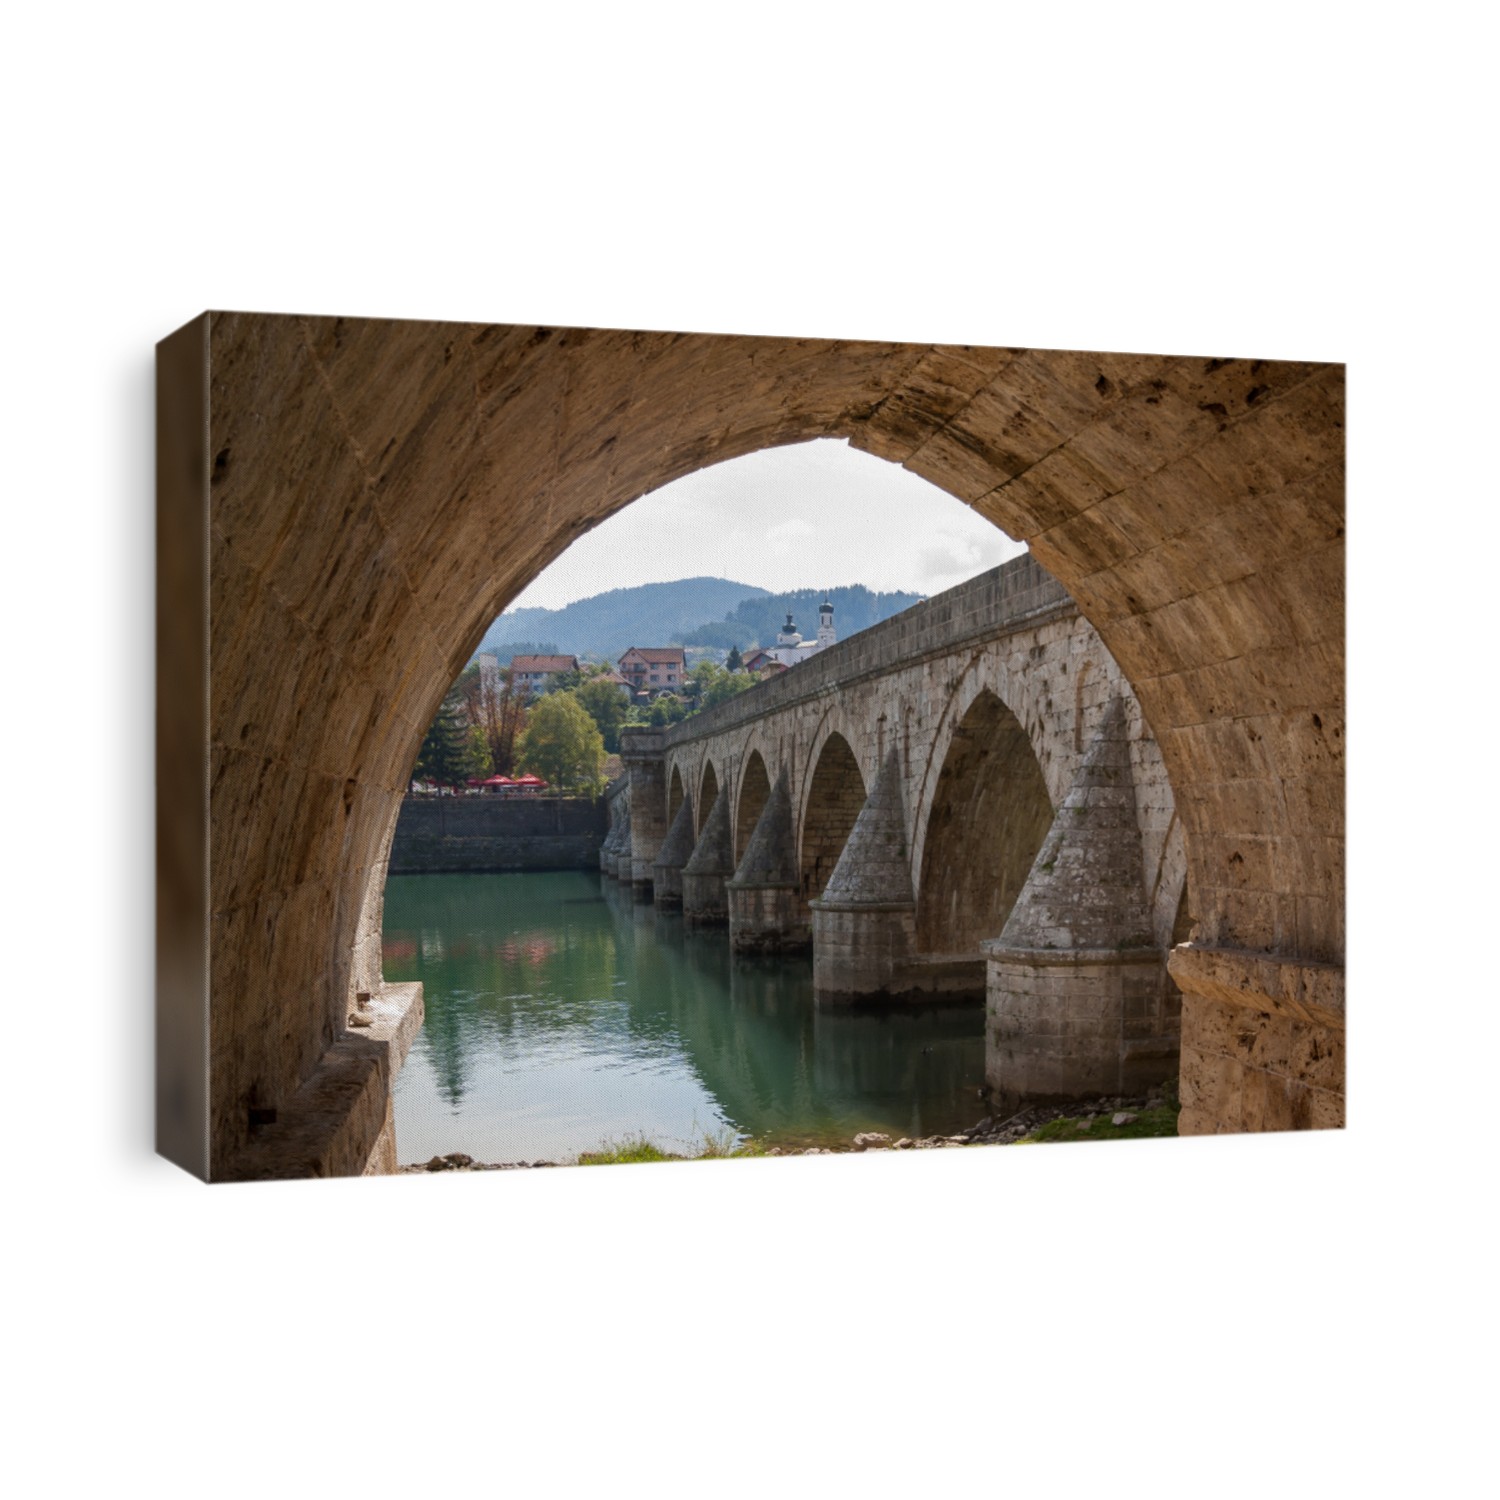 The Mehmed Pasa Sokolovic Bridge is a historic bridge in Visegrad, over the Drina River. It is characteristic of the apogee of Turkish monumental architecture and civil engineering. 